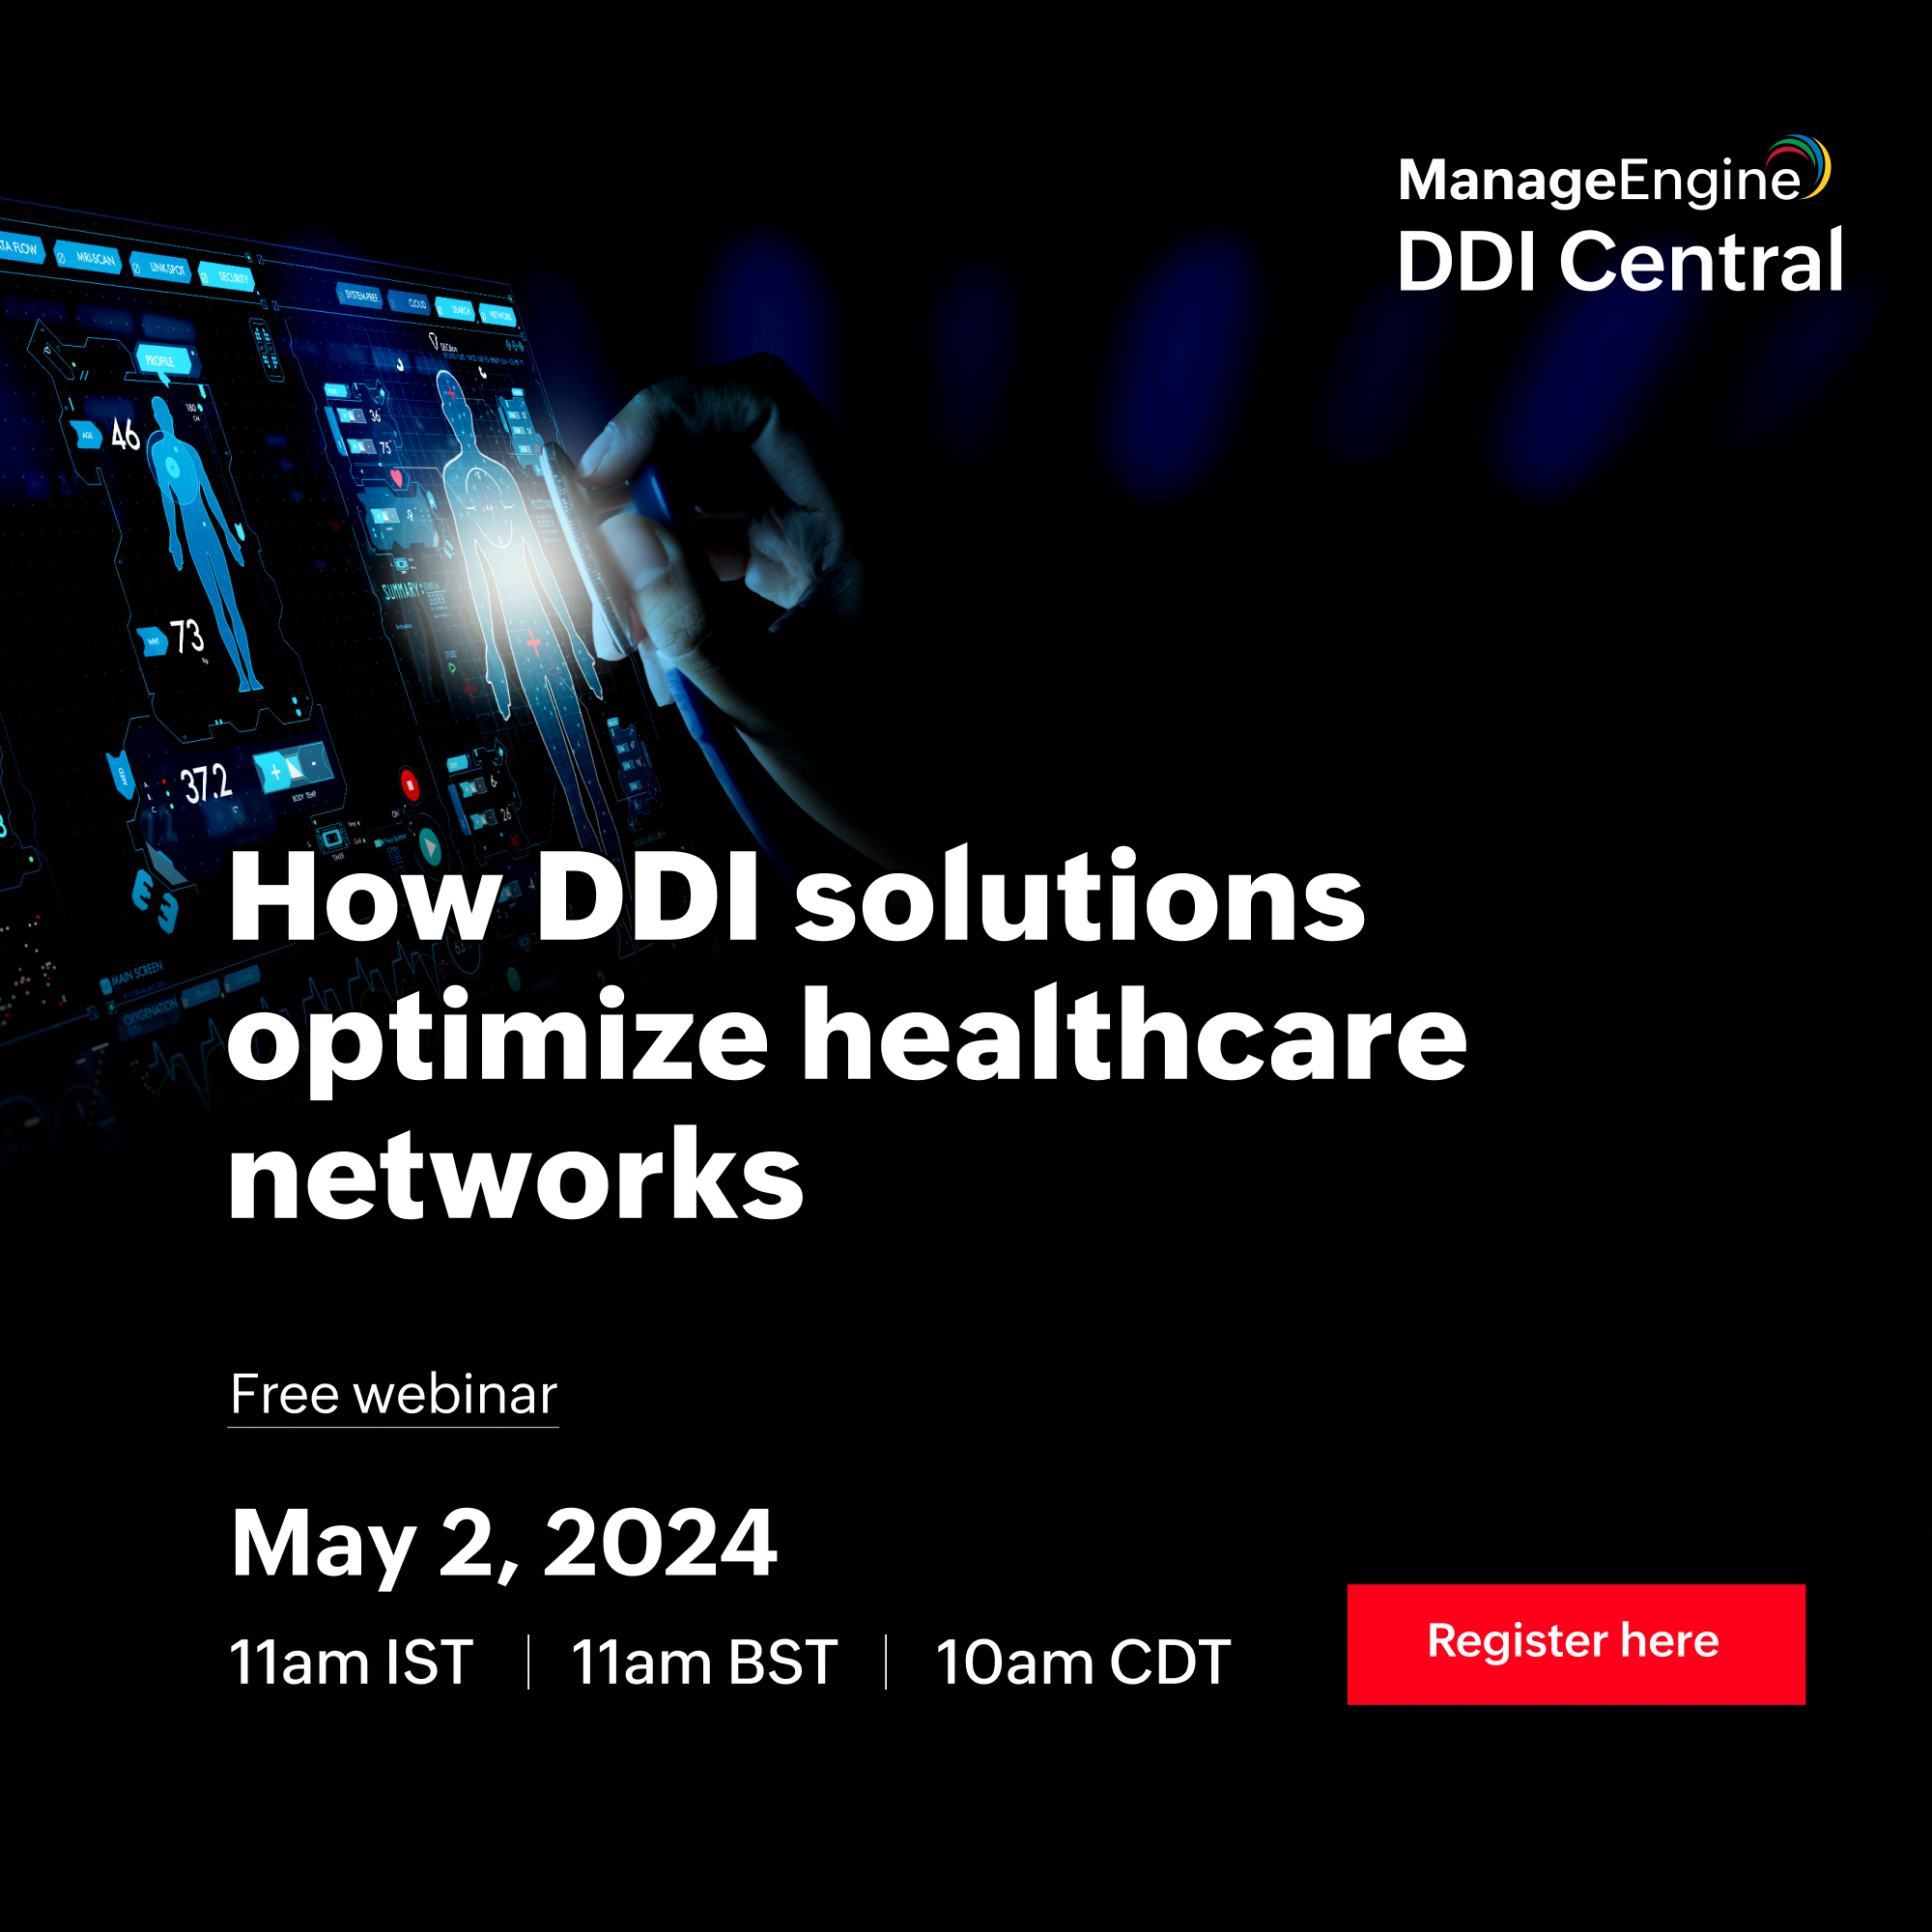 How DDI solutions optimize healthcare networks